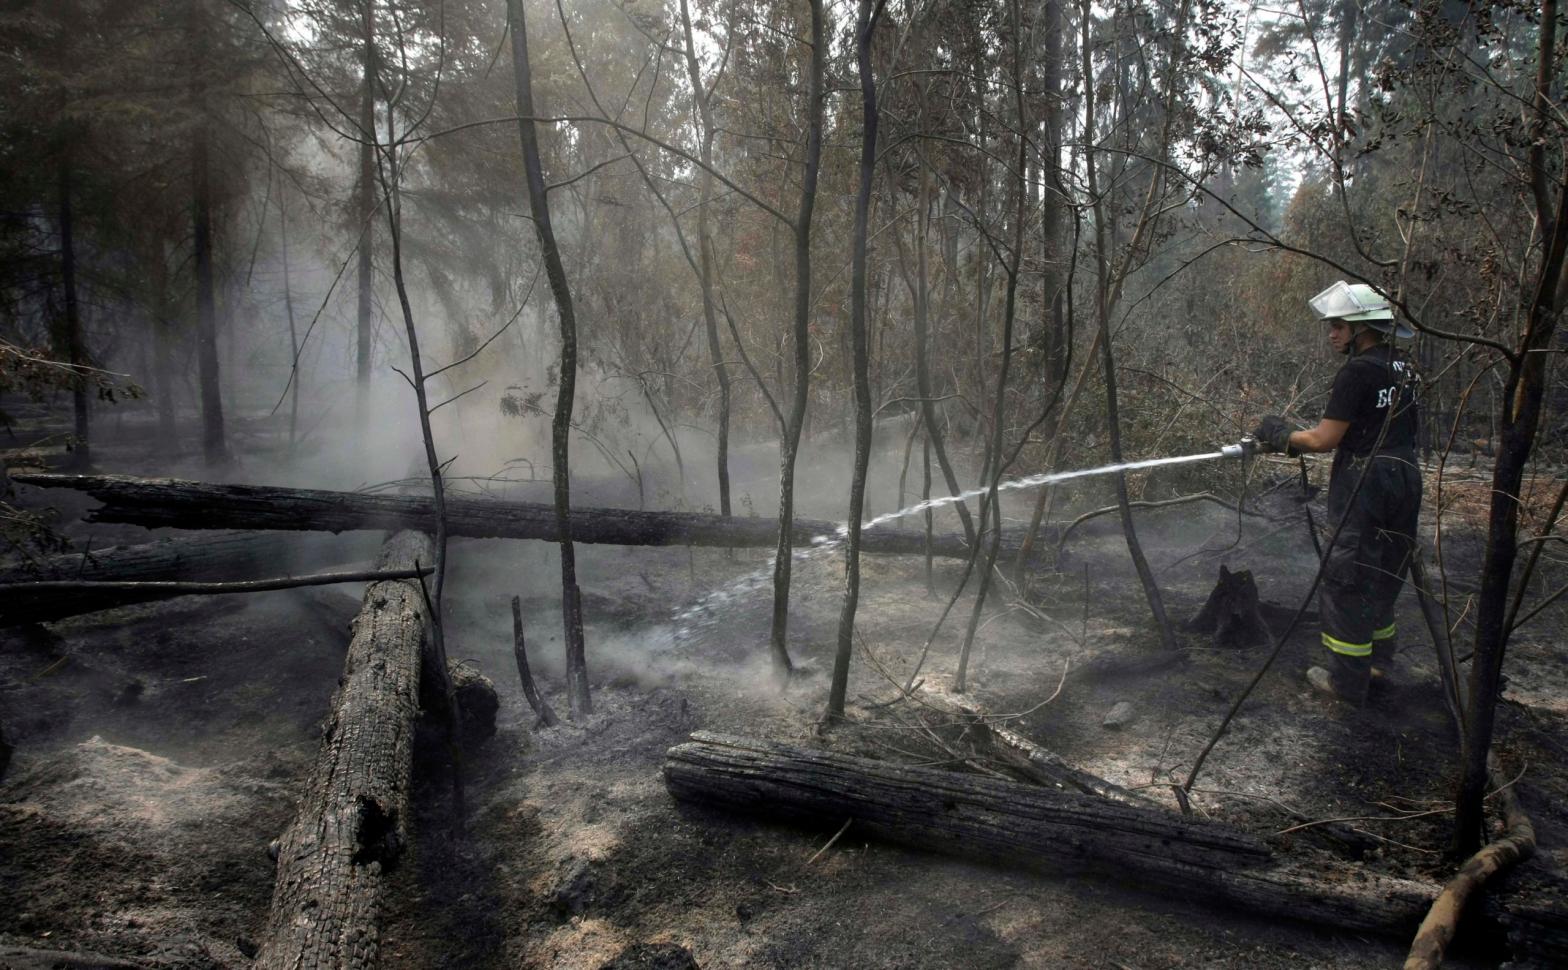 A Bulgarian firefighter hoses water onto smouldering tree trunks in a forest in the Noginsk district on Aug. 10, 2010 to prevent resumption of fire.  (Photo: Misha Japaridze, AP)